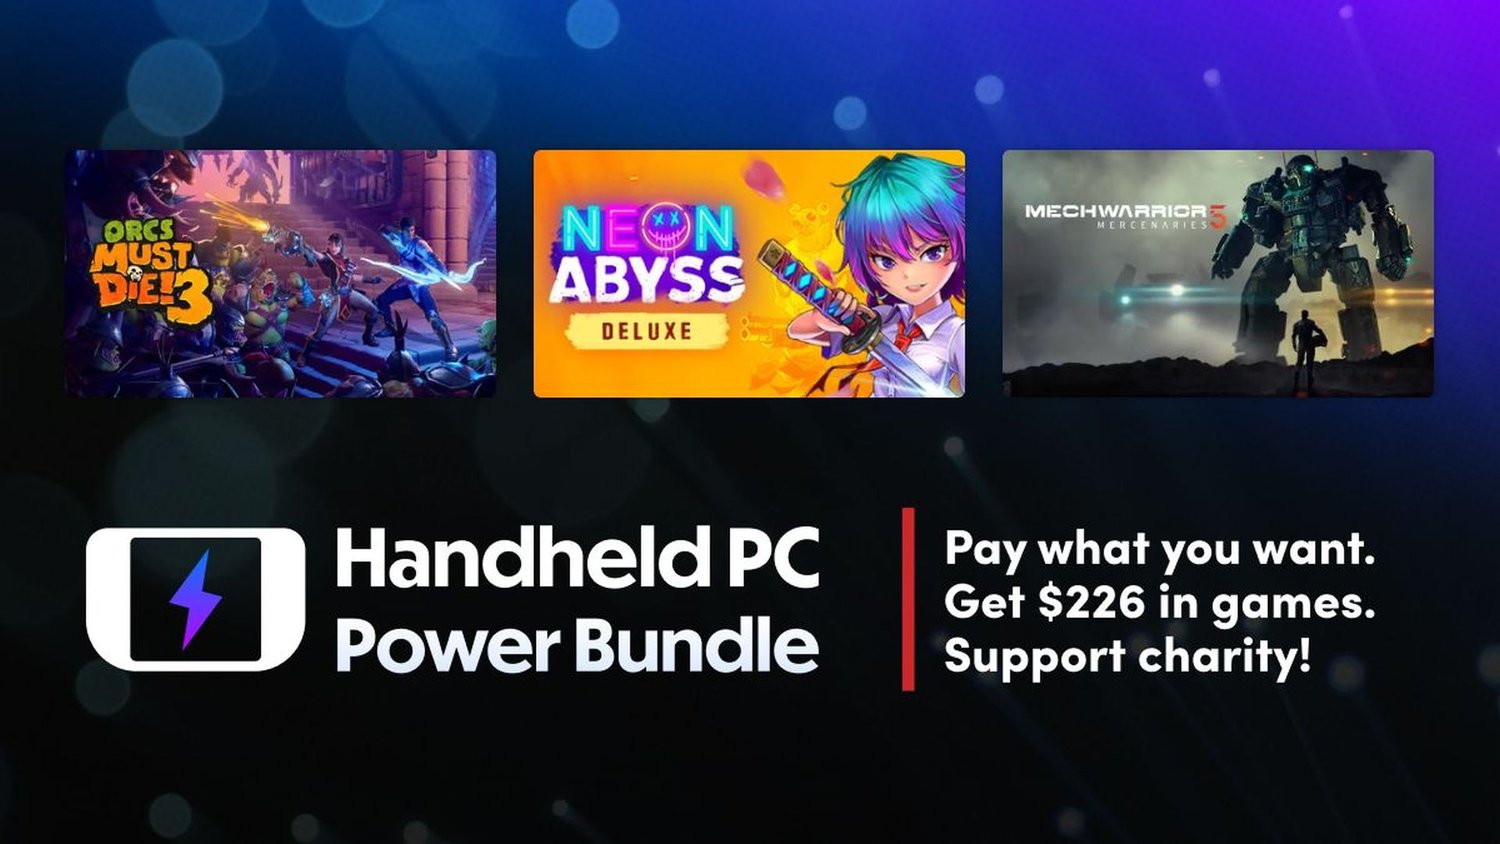 Grab Some Humble Published Games in This New Bundle - Steam Deck HQ